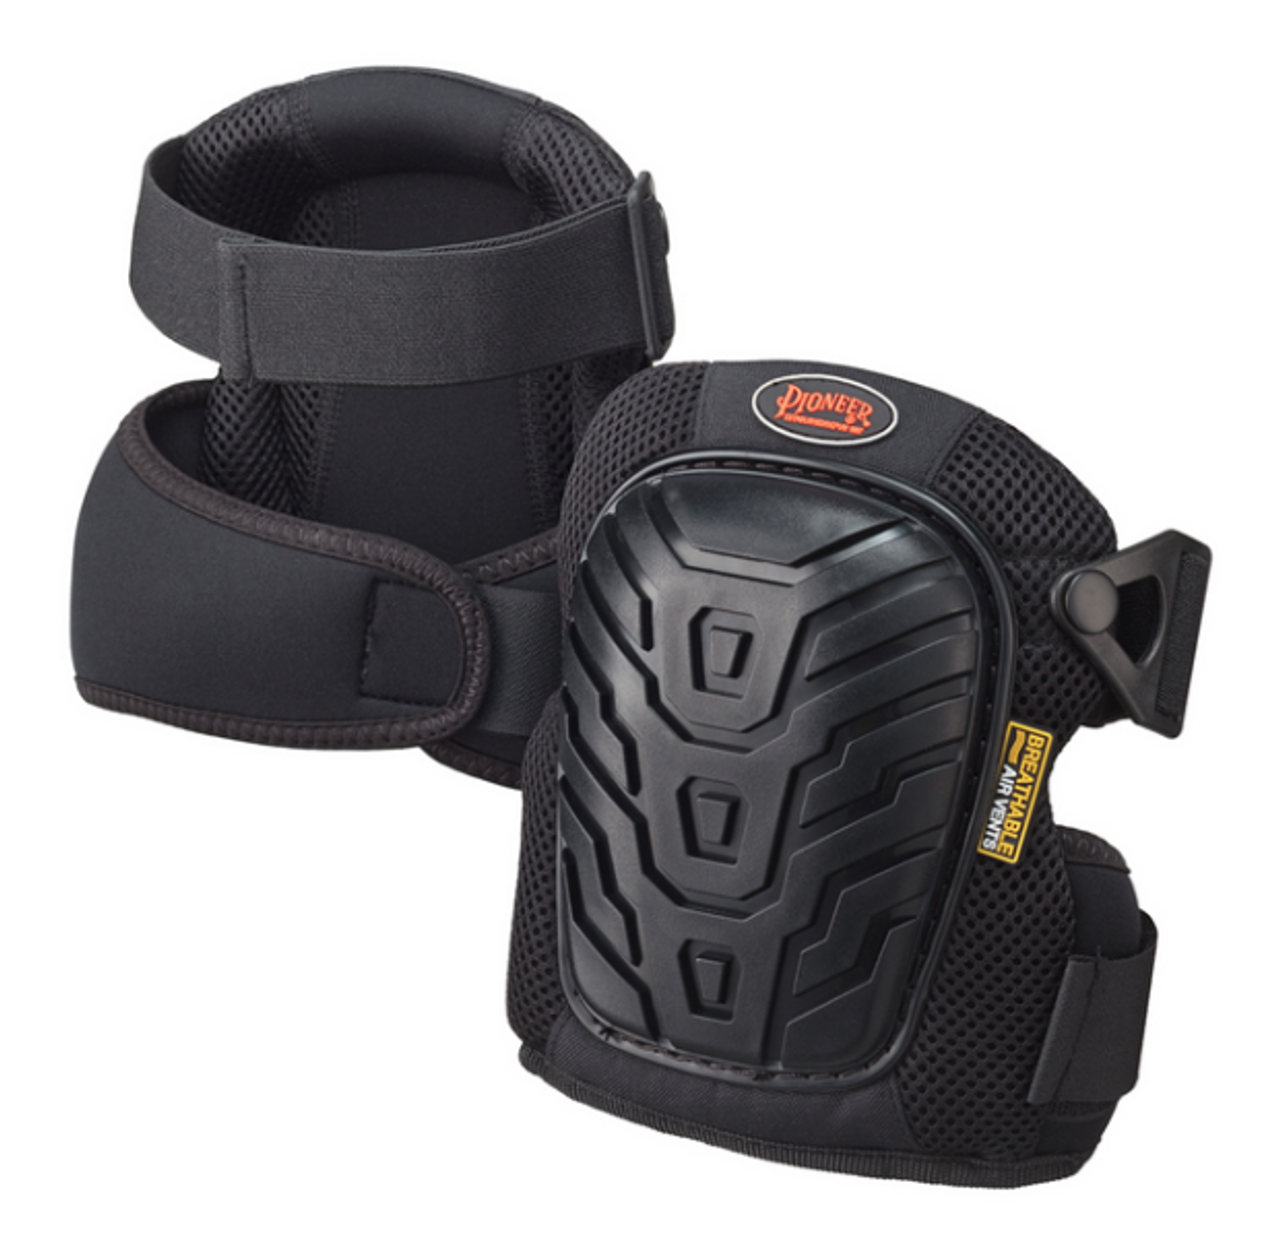 169 BREATHABLE AIR VENTED PROFESSIONAL GEL KNEE PAD - OVERSIZE